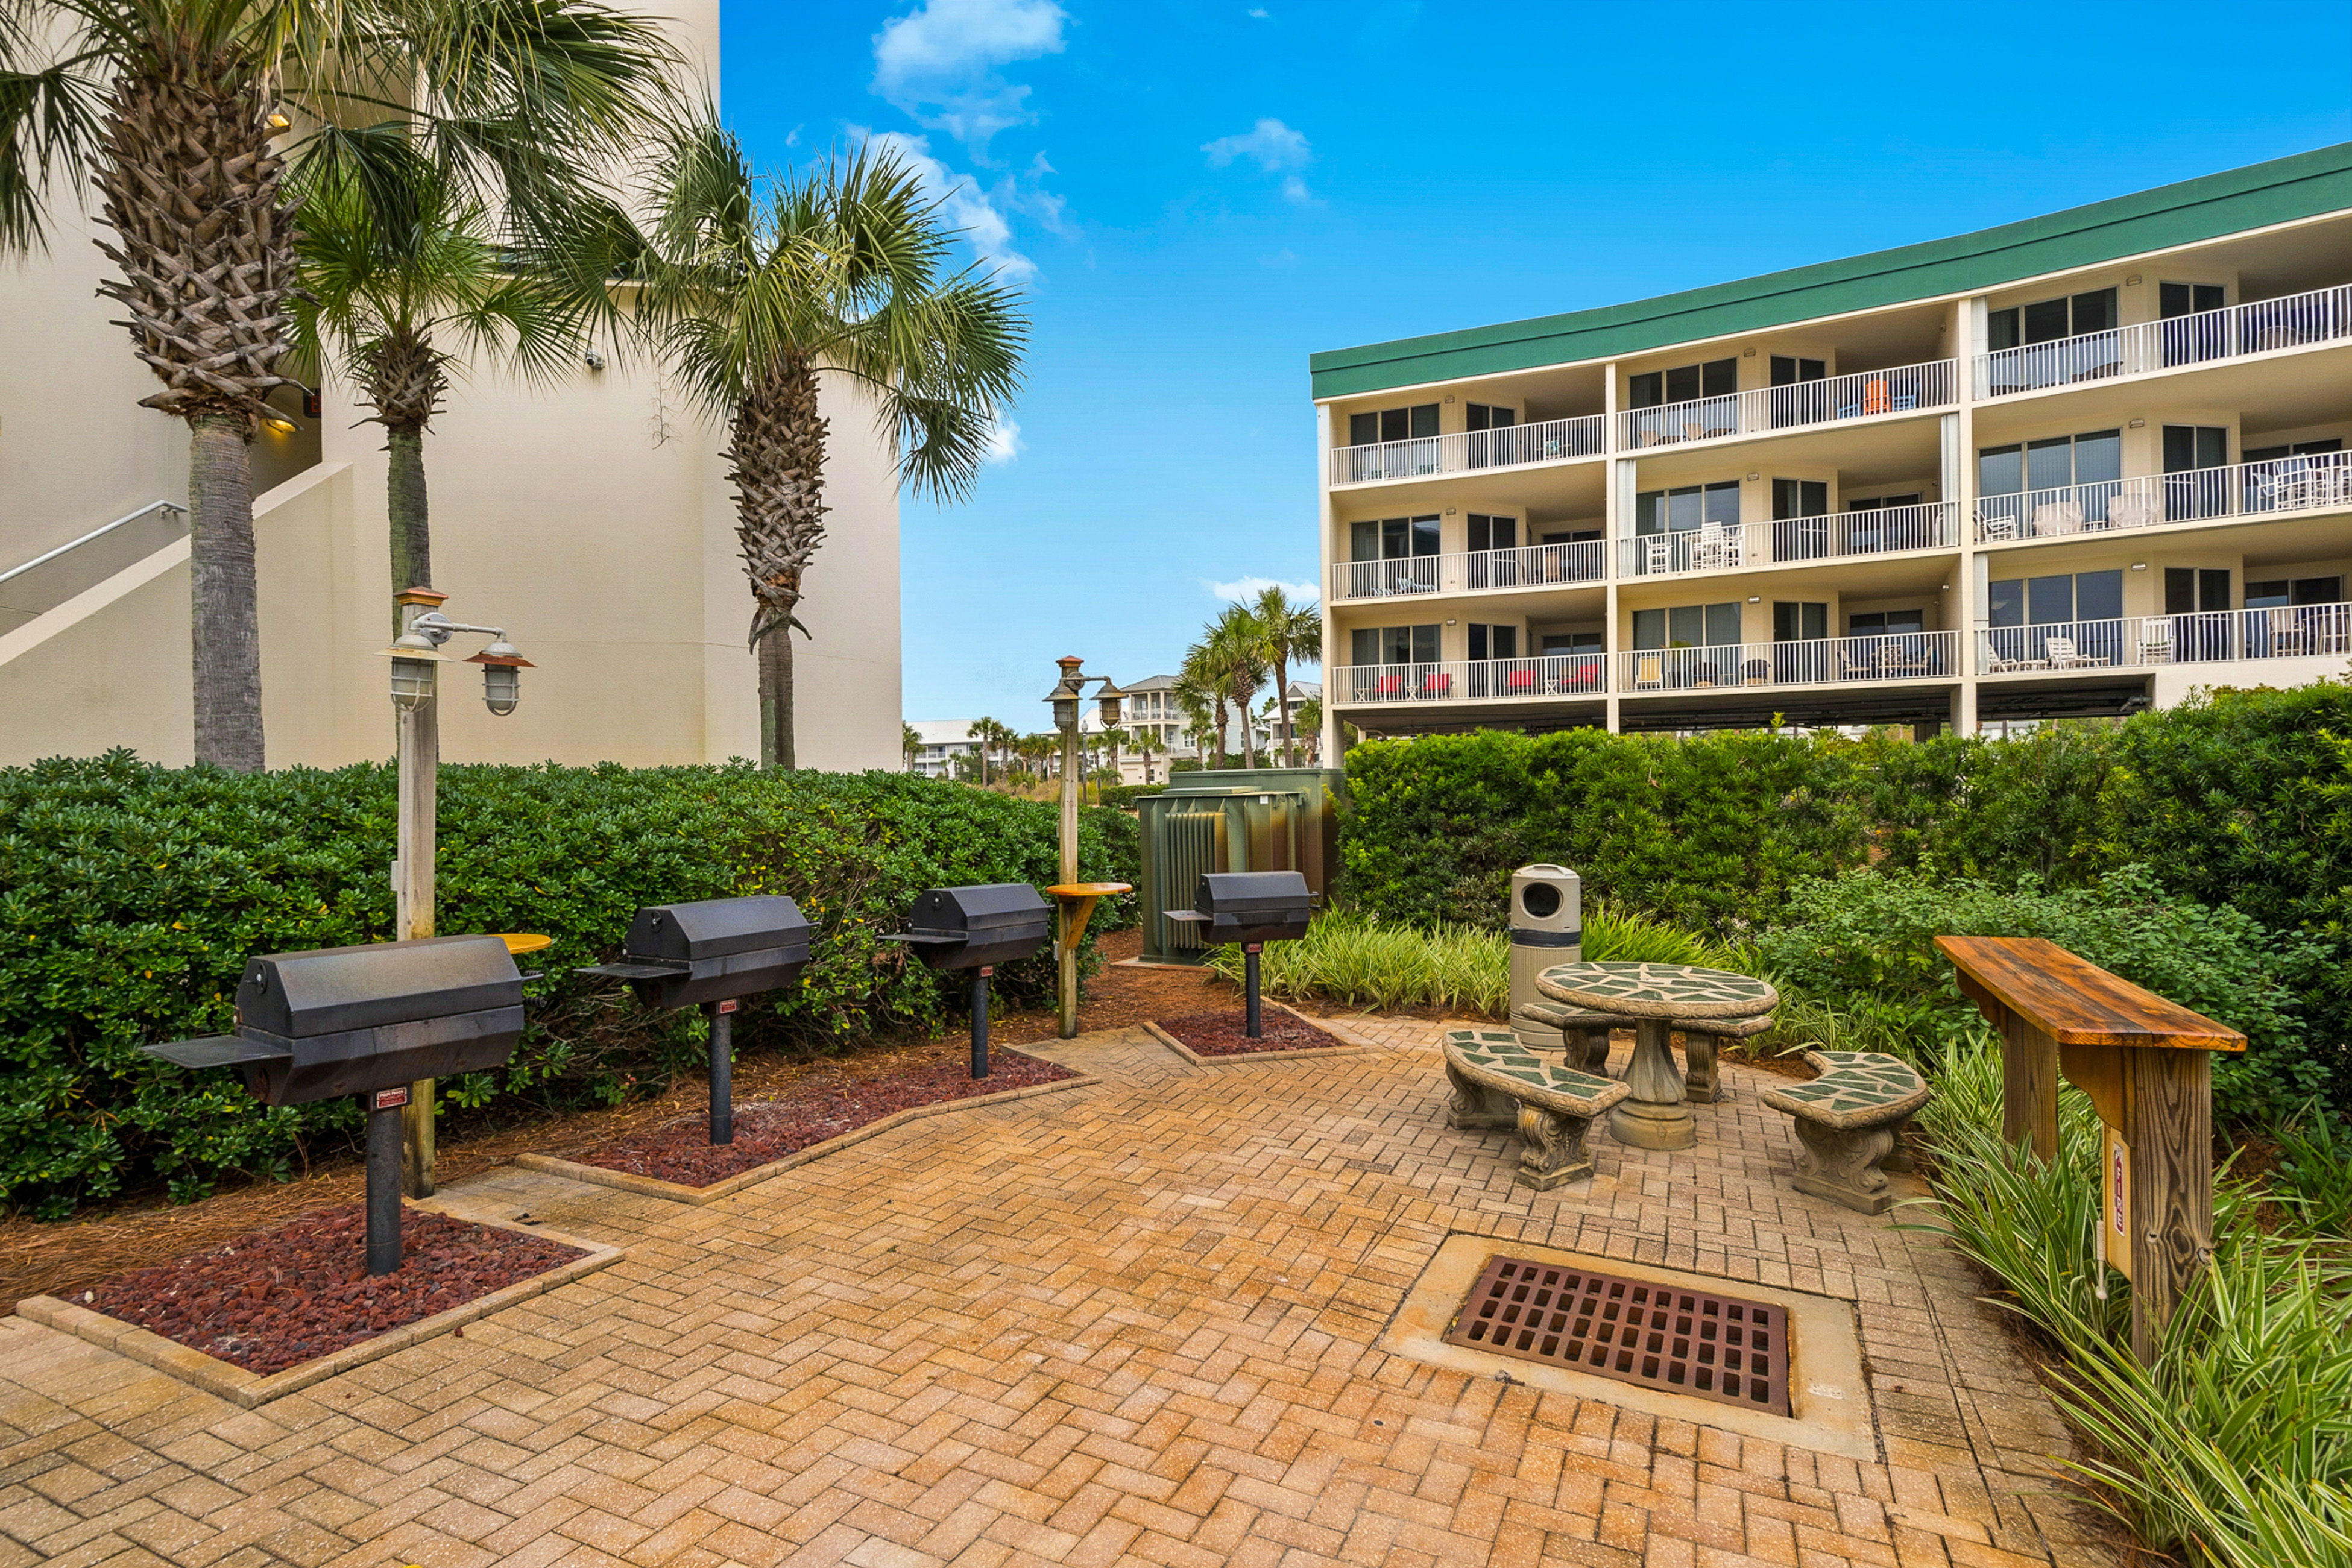 Dunes of Seagrove A104 Condo rental in Dunes of Seagrove in Highway 30-A Florida - #29